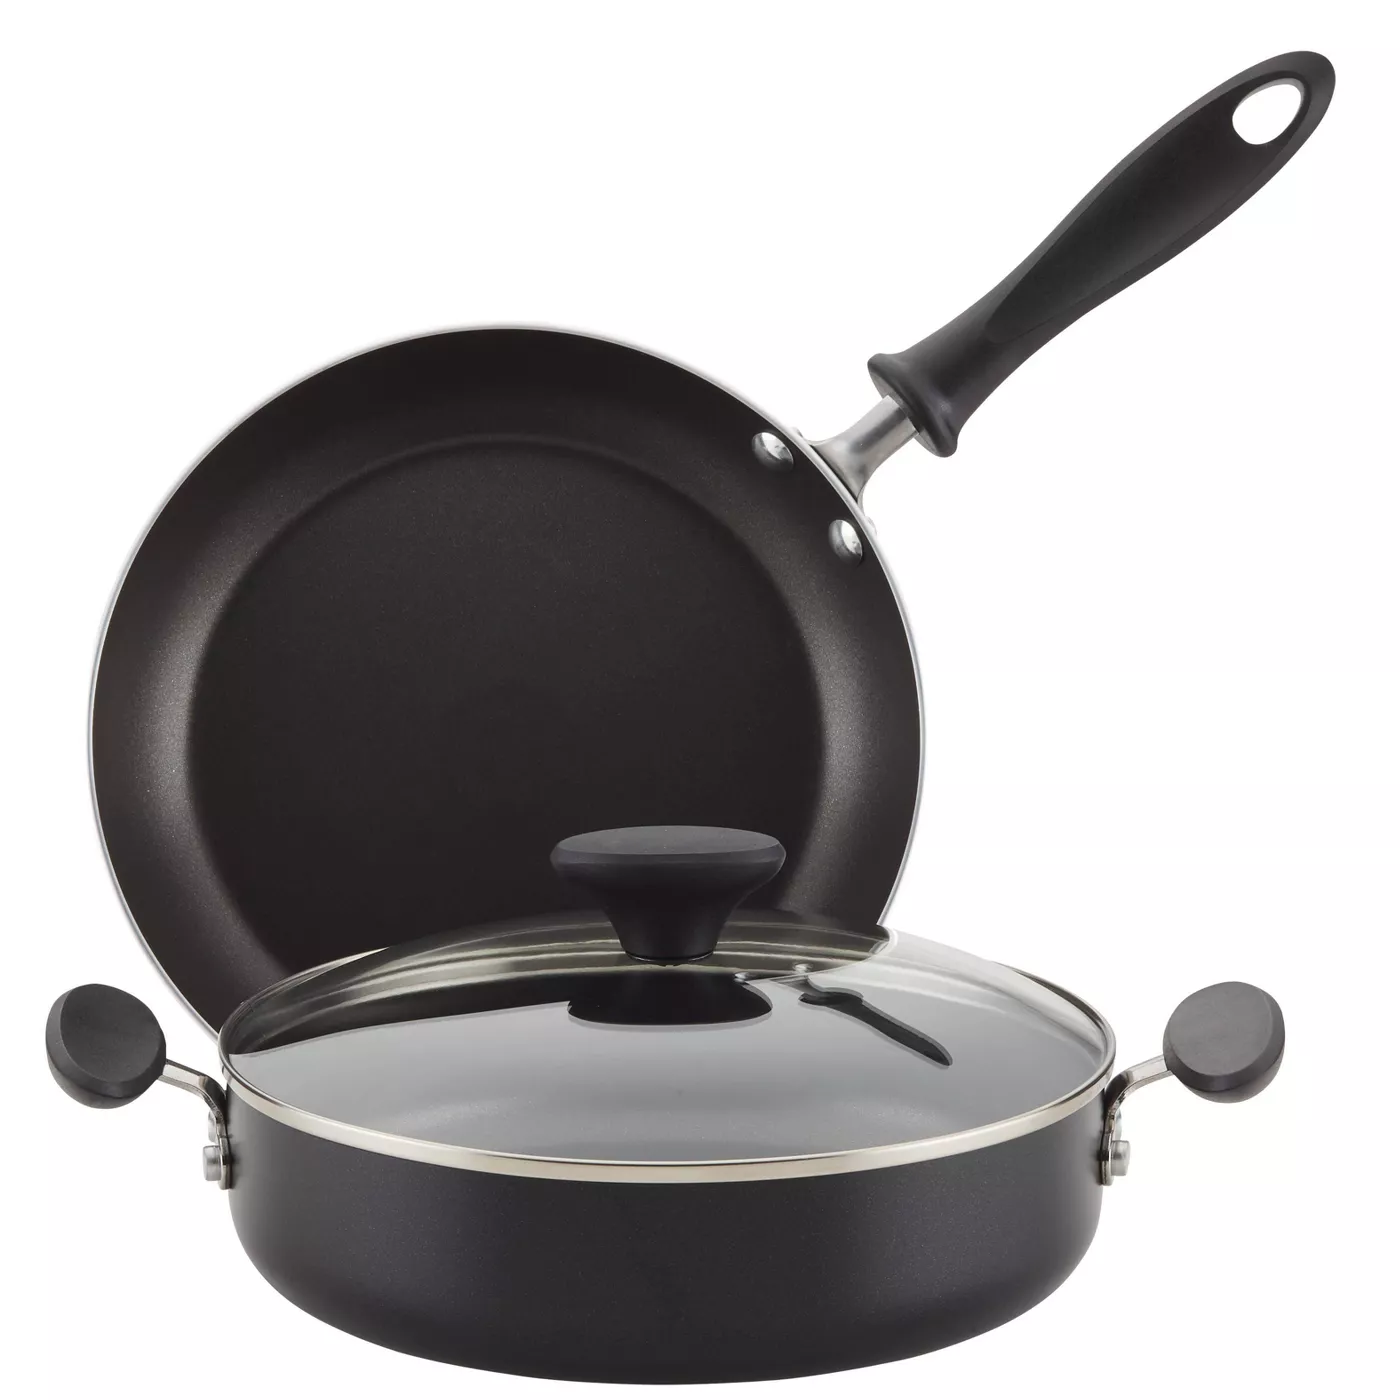 Farberware 3pc Nonstick Aluminum Reliance Covered Sauteuse and Open Skillet Cookware Set Black - image 1 of 8